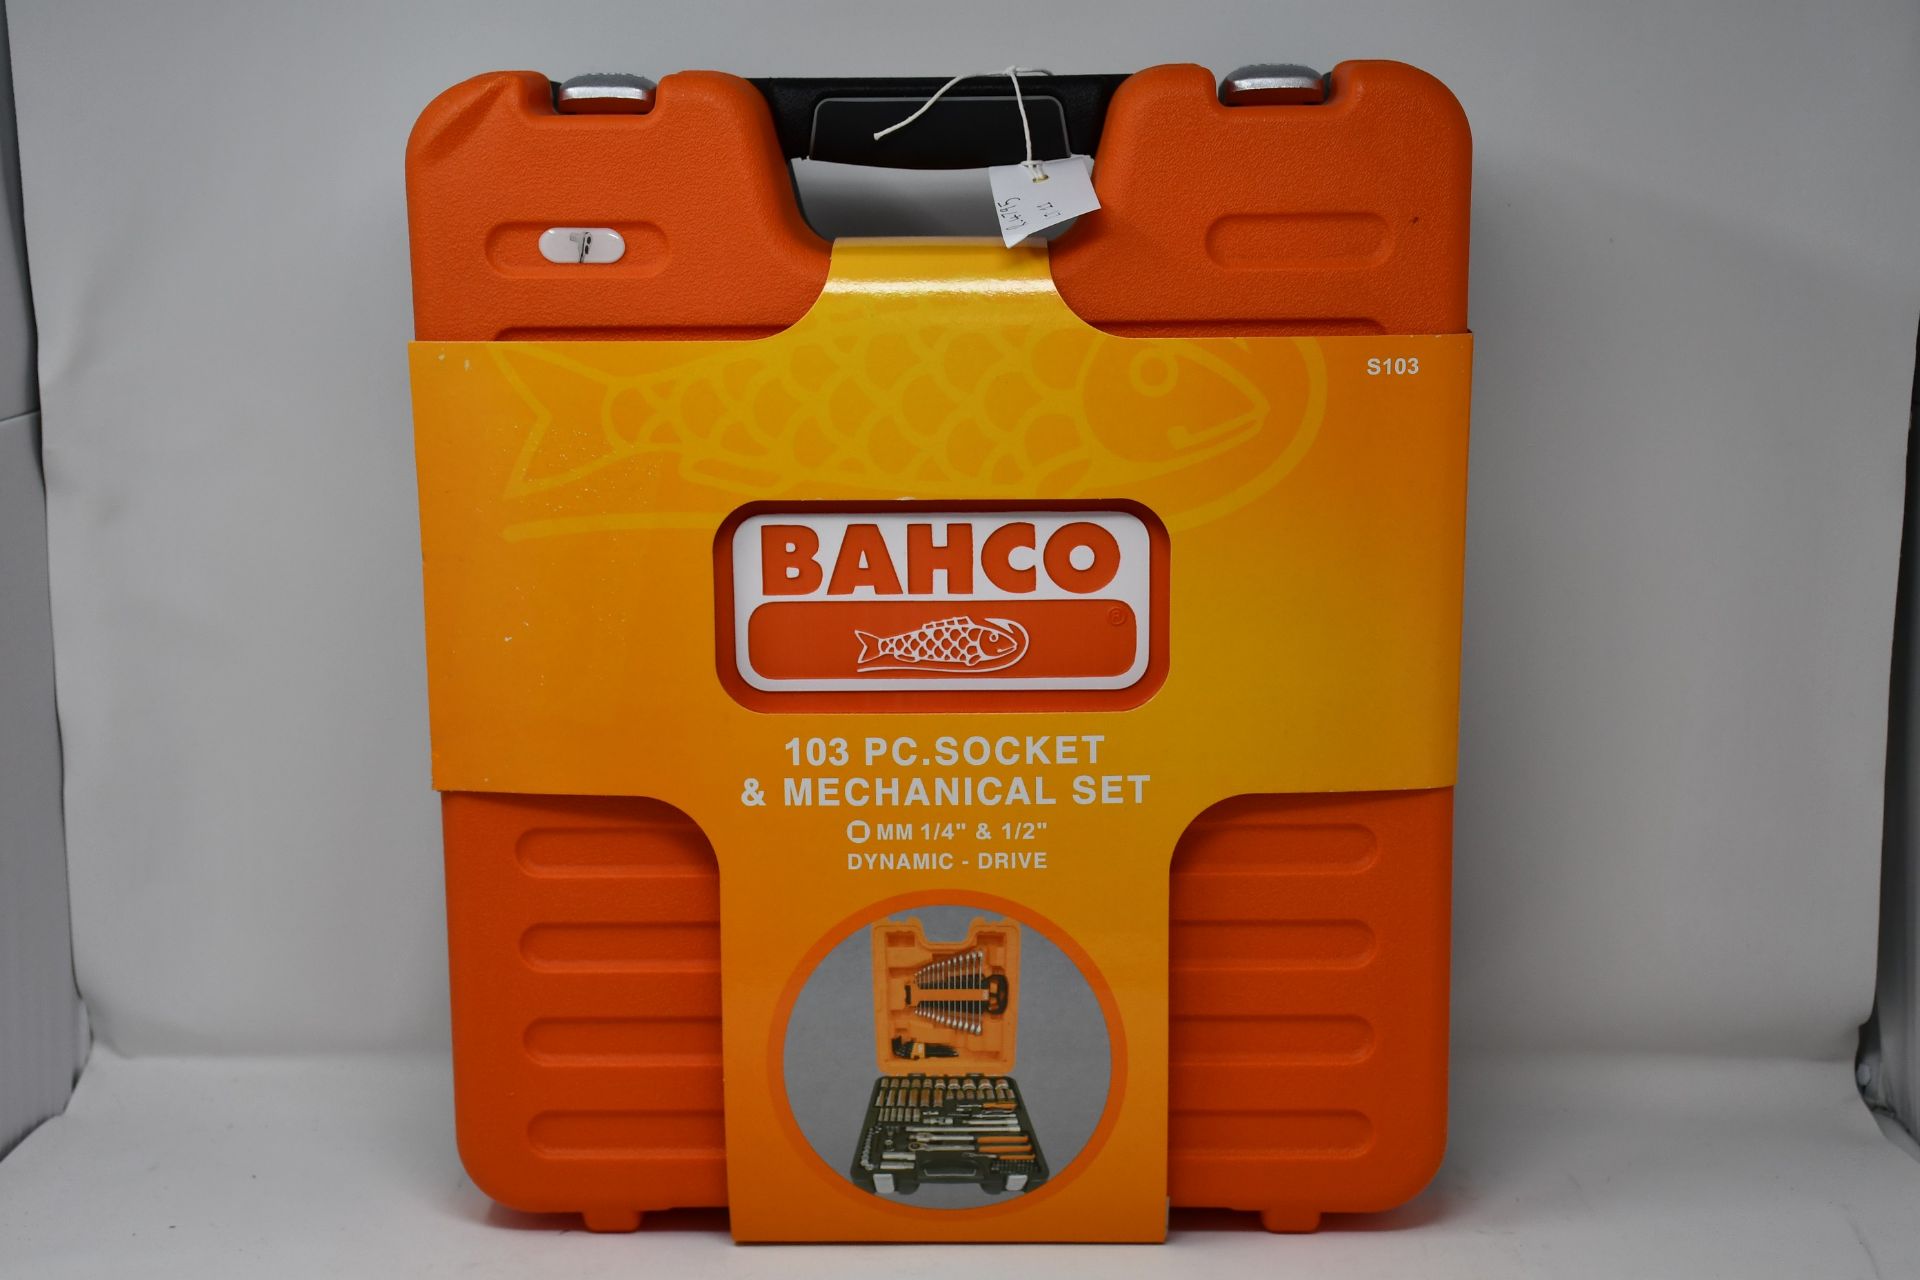 One as new Bahco 103-piece socket and mechanical set.